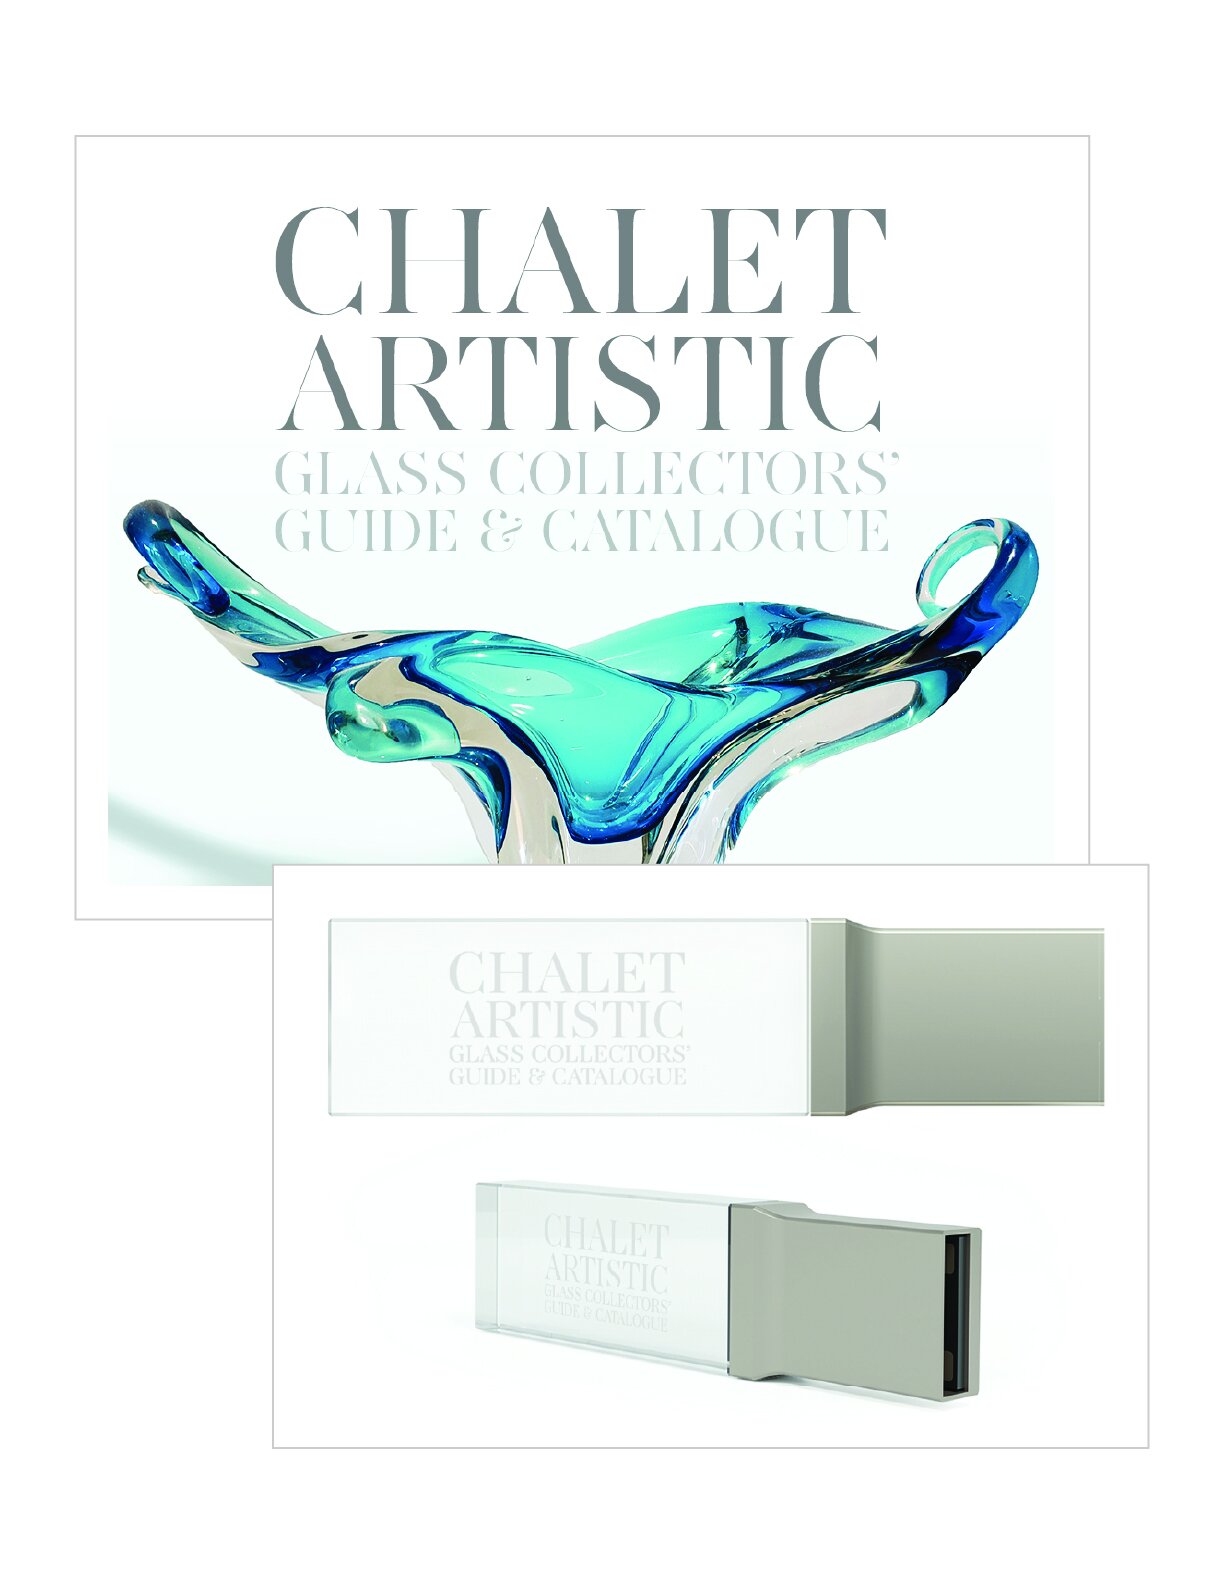 brand new Chalet art glass reference book "Chalet Crystal Clear" 